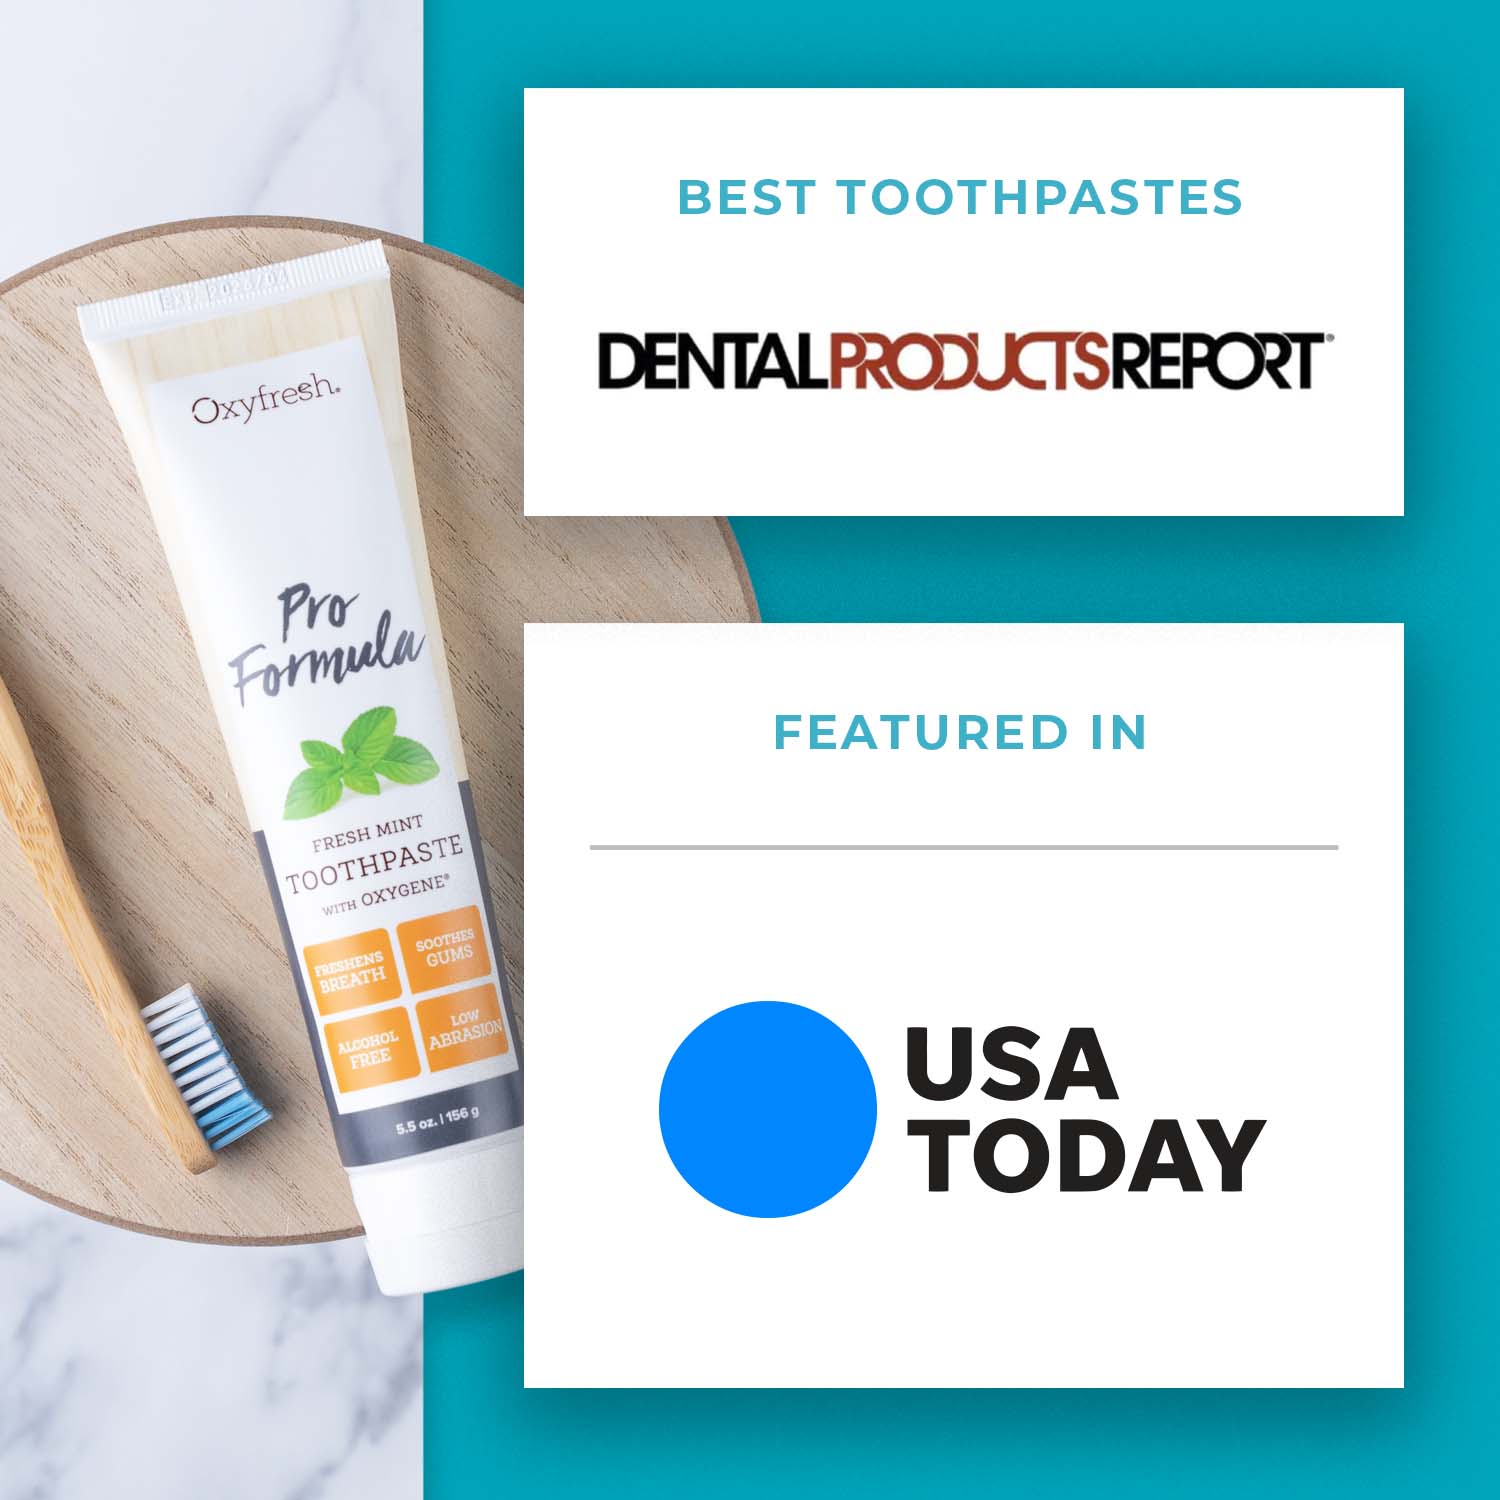 oxyfresh-pro-formula-toothpaste-featured-on-Dental-Products-Report-and-USA-today